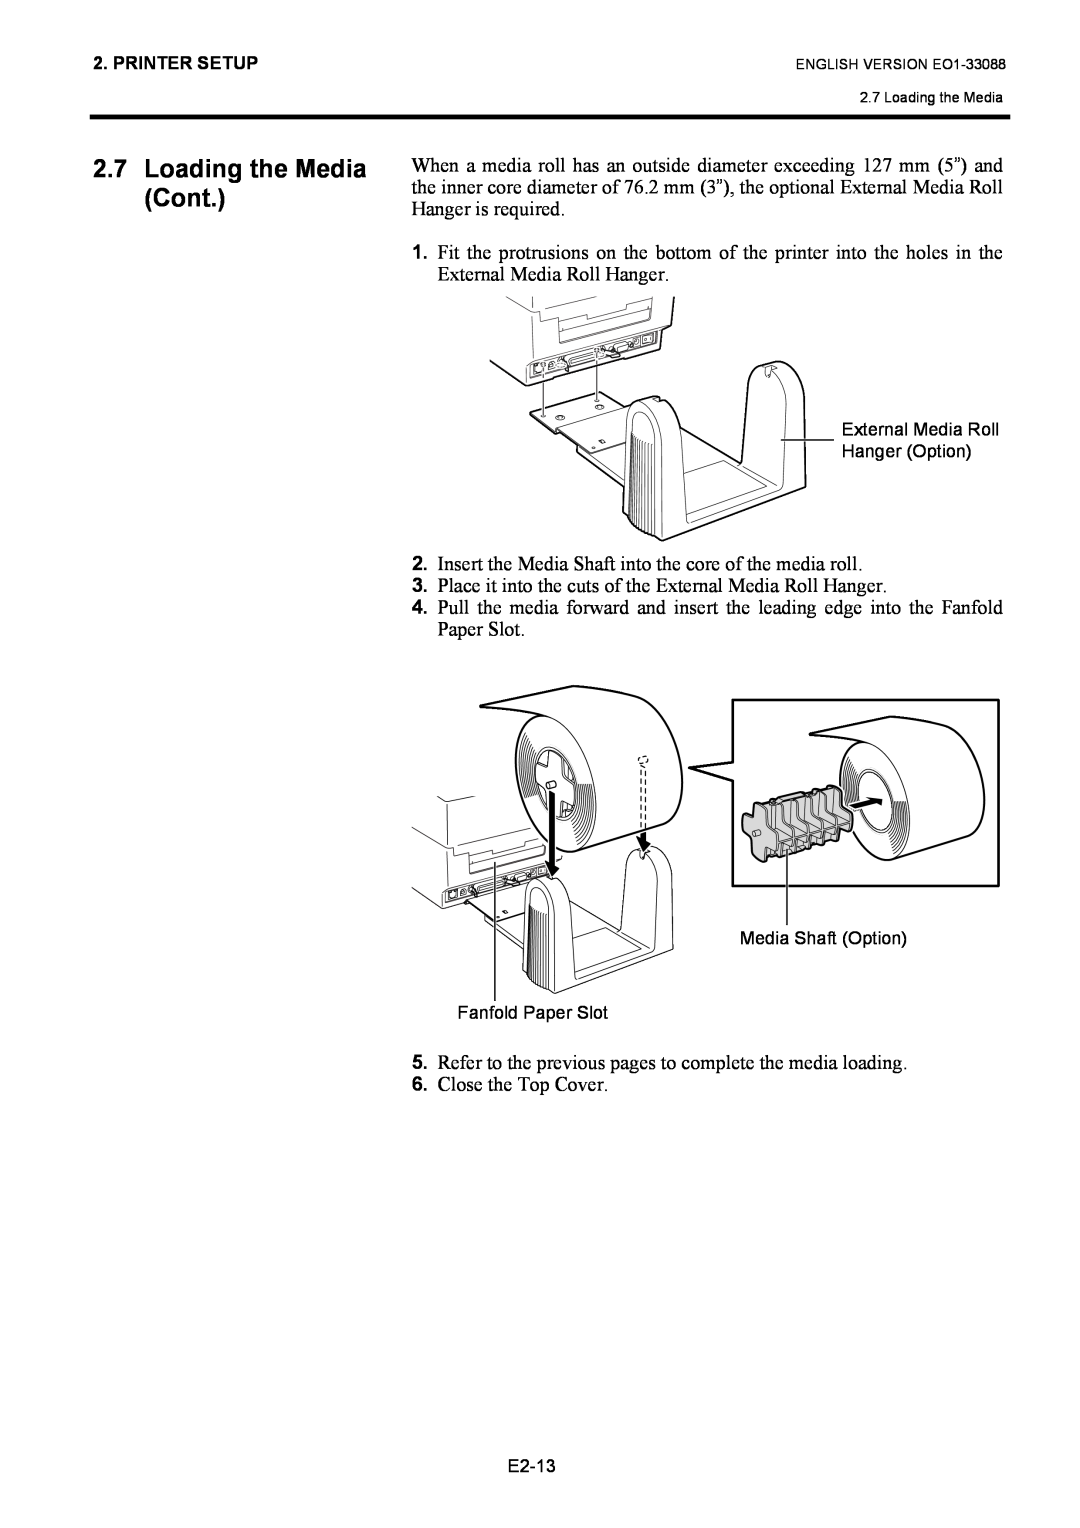 Toshiba EO1-33088, B-EV4D SERIES owner manual Loading the Media Cont, Insert the Media Shaft into the core of the media roll 